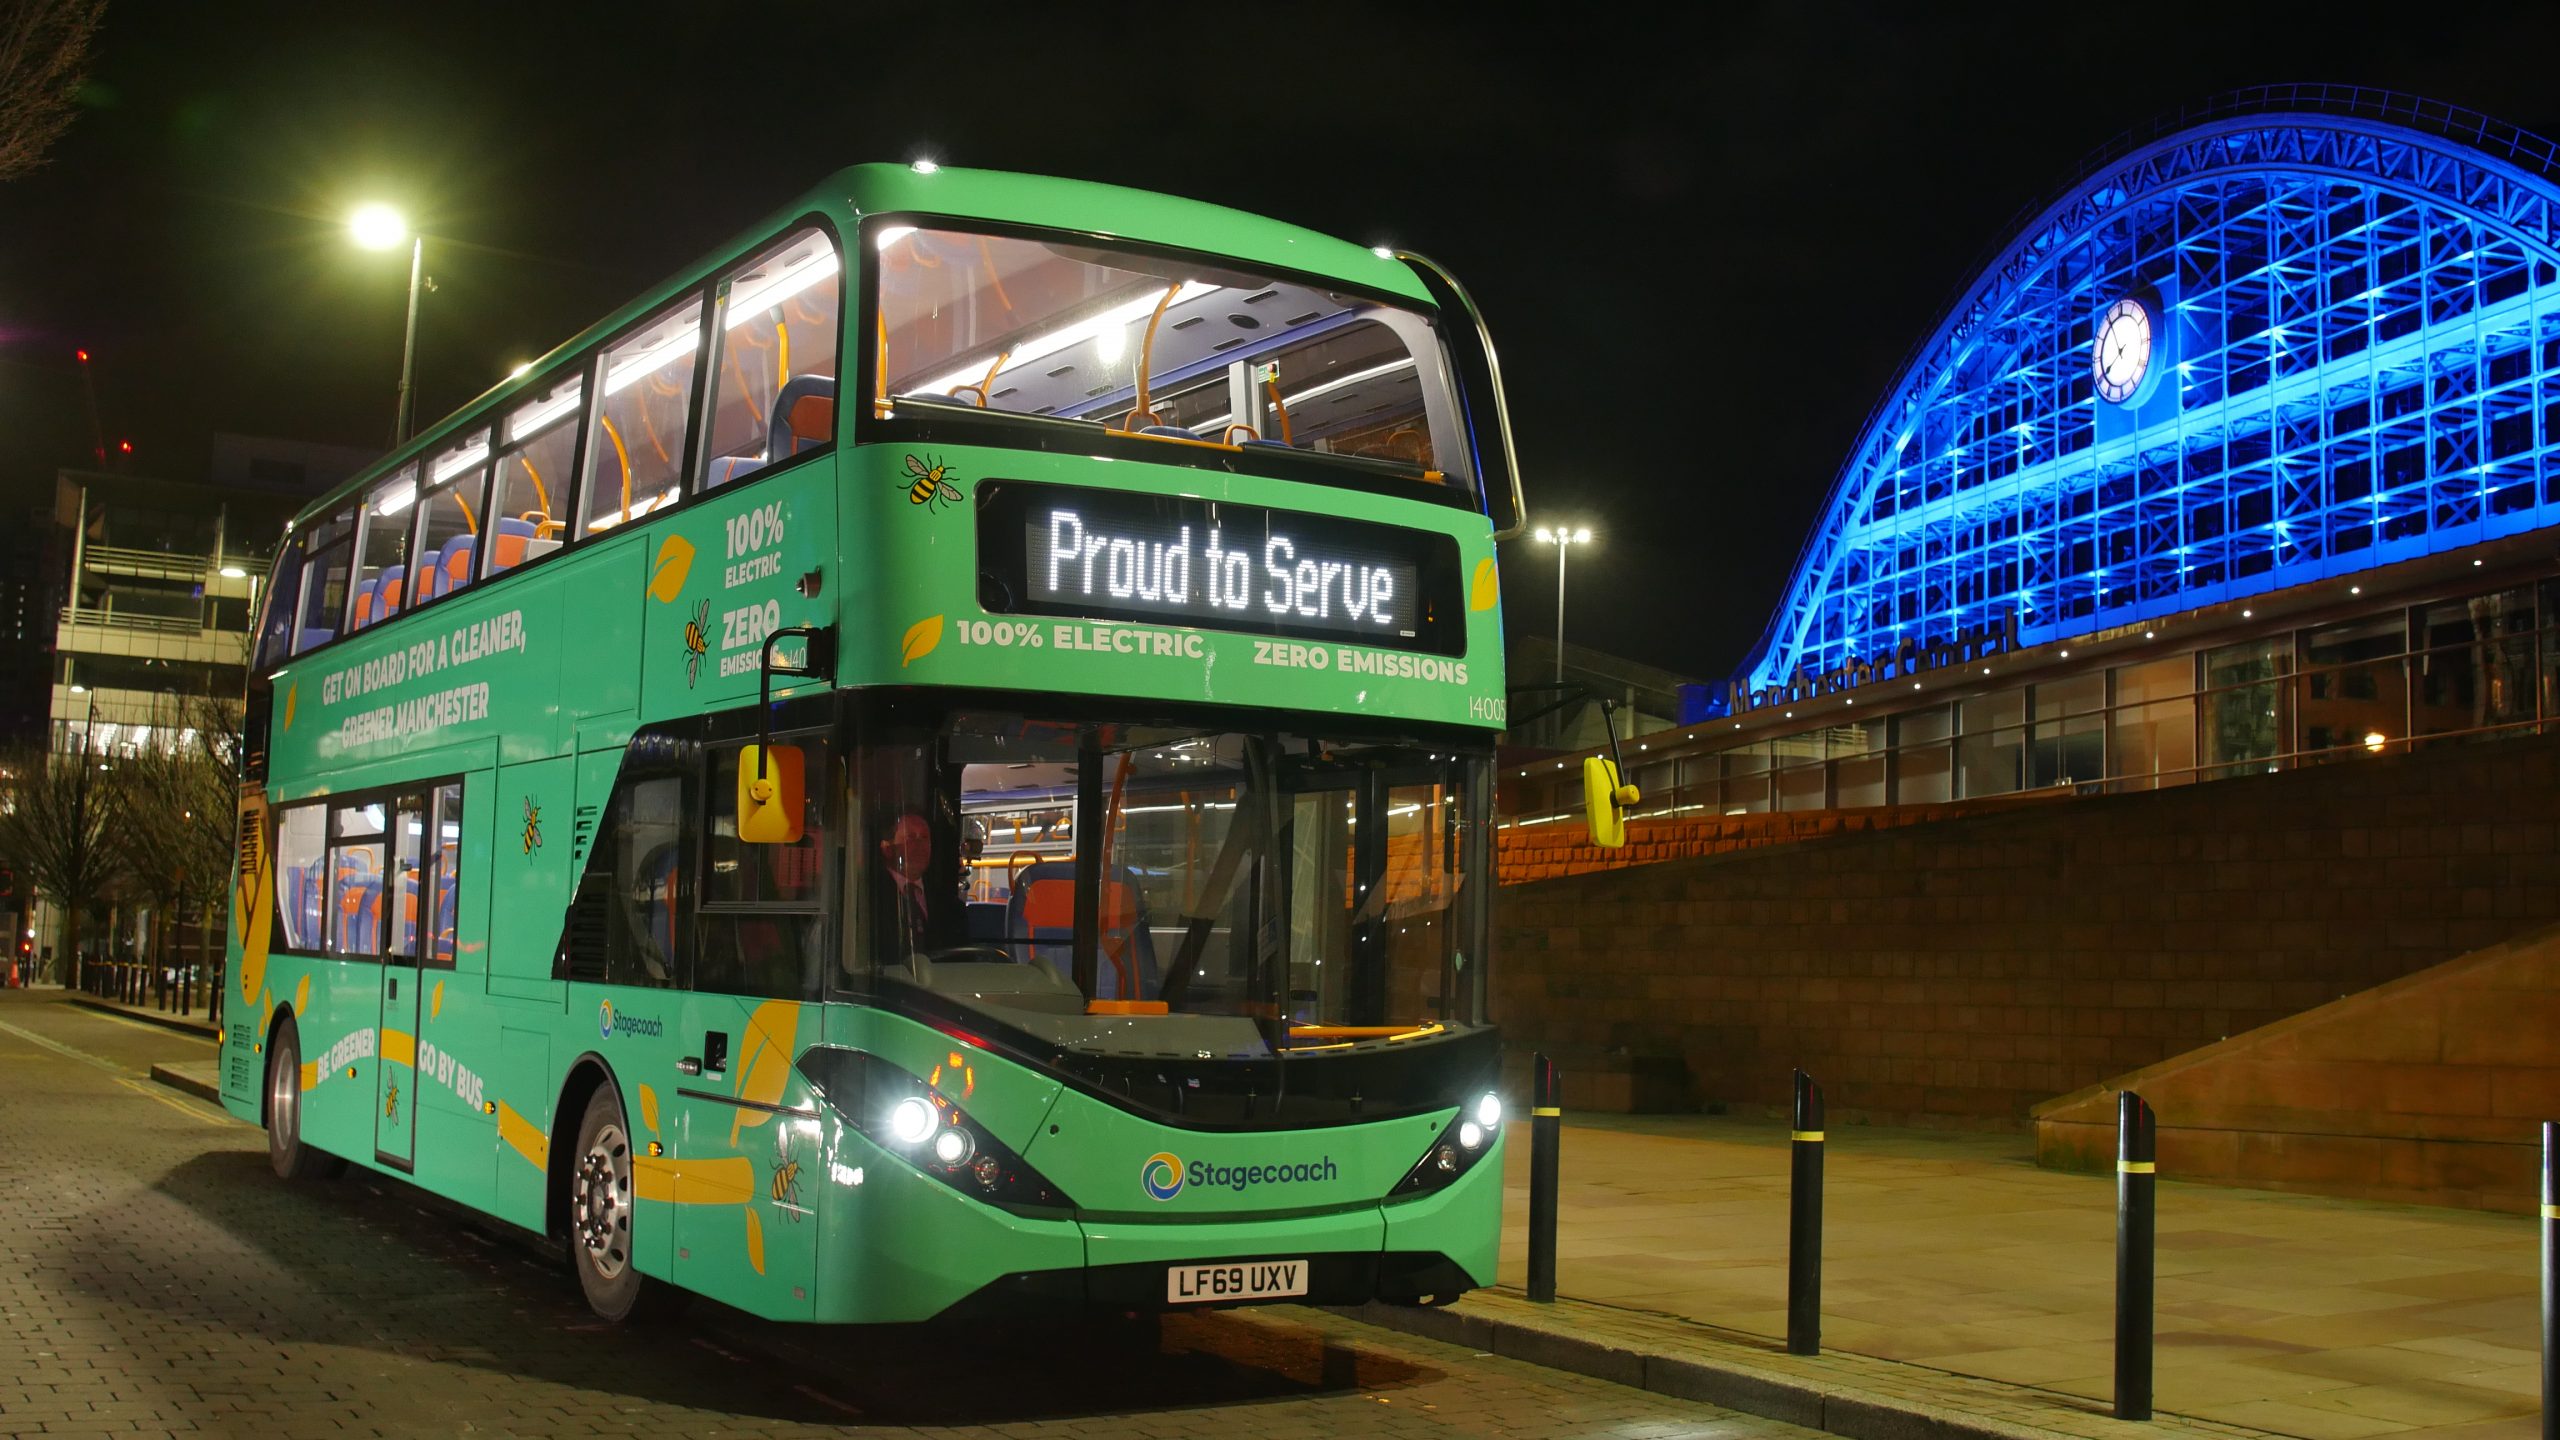 Green buses to attract more passengers to UK bus networks, says Stagecoach